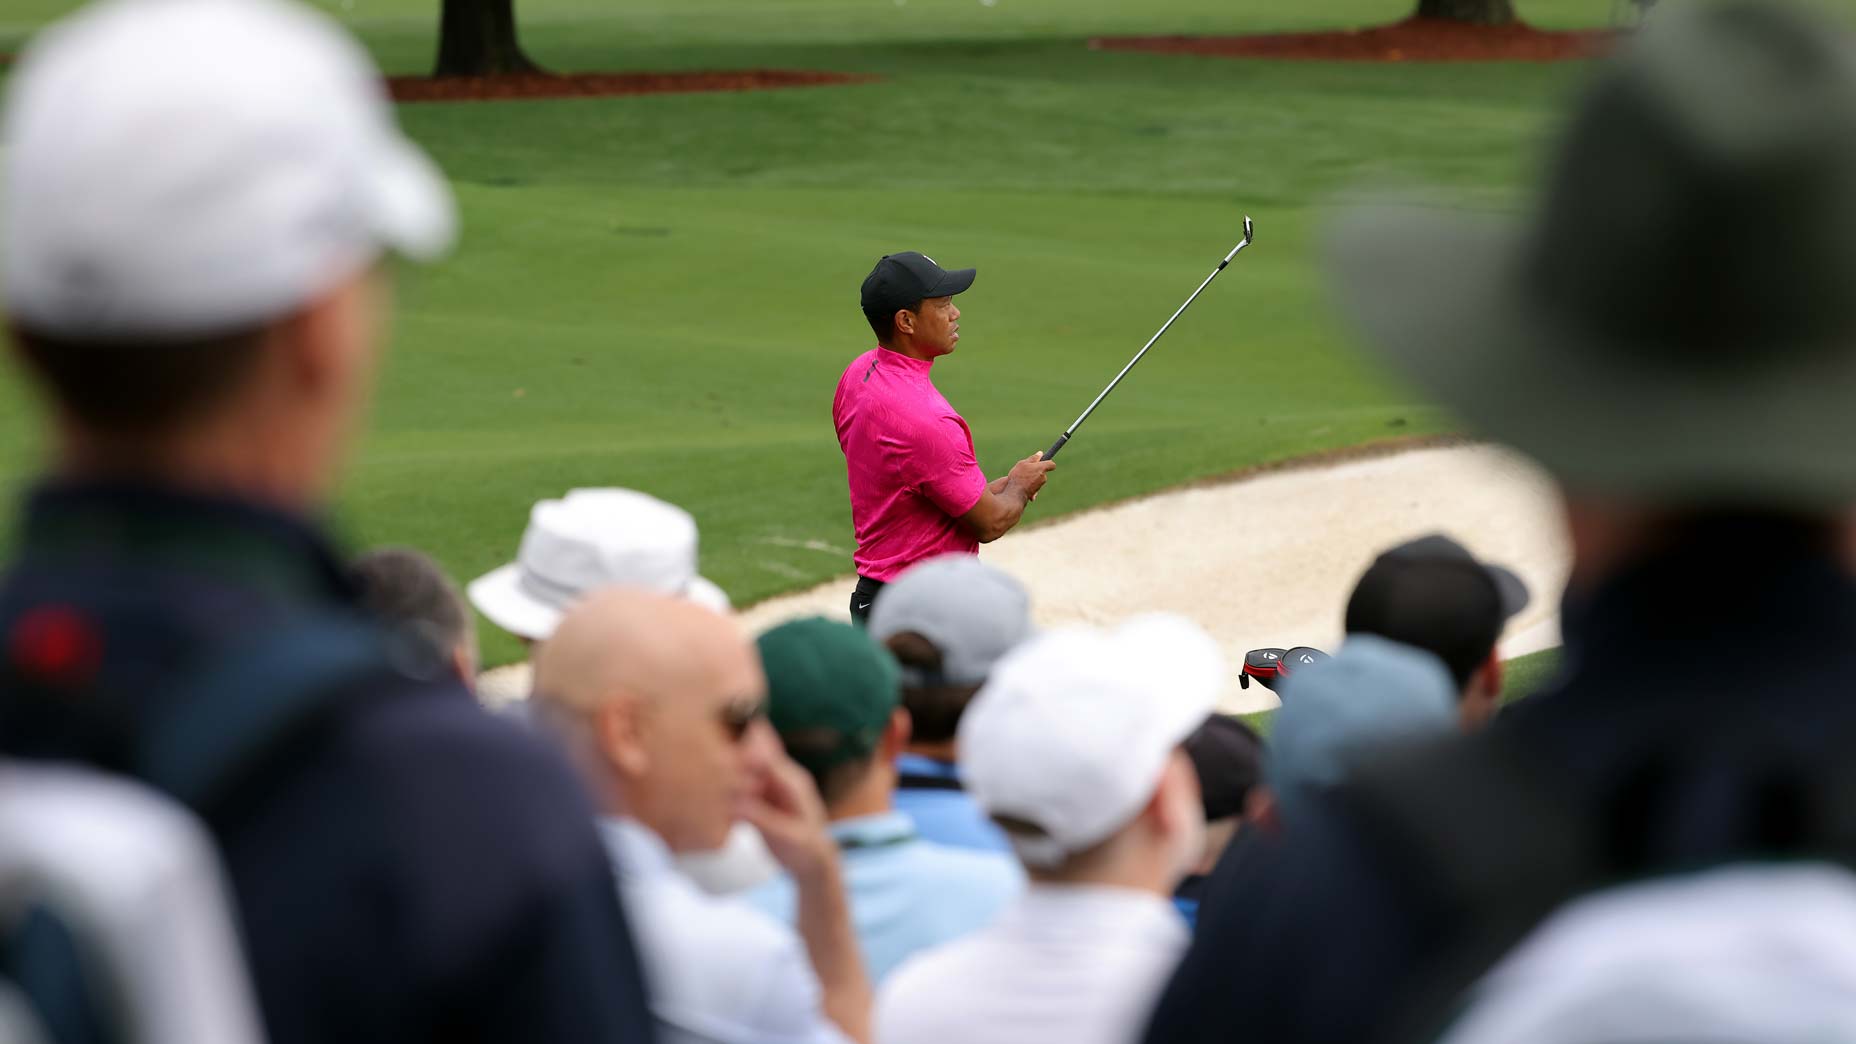 Tiger Woods dazzles in his first competitive round in 17 months